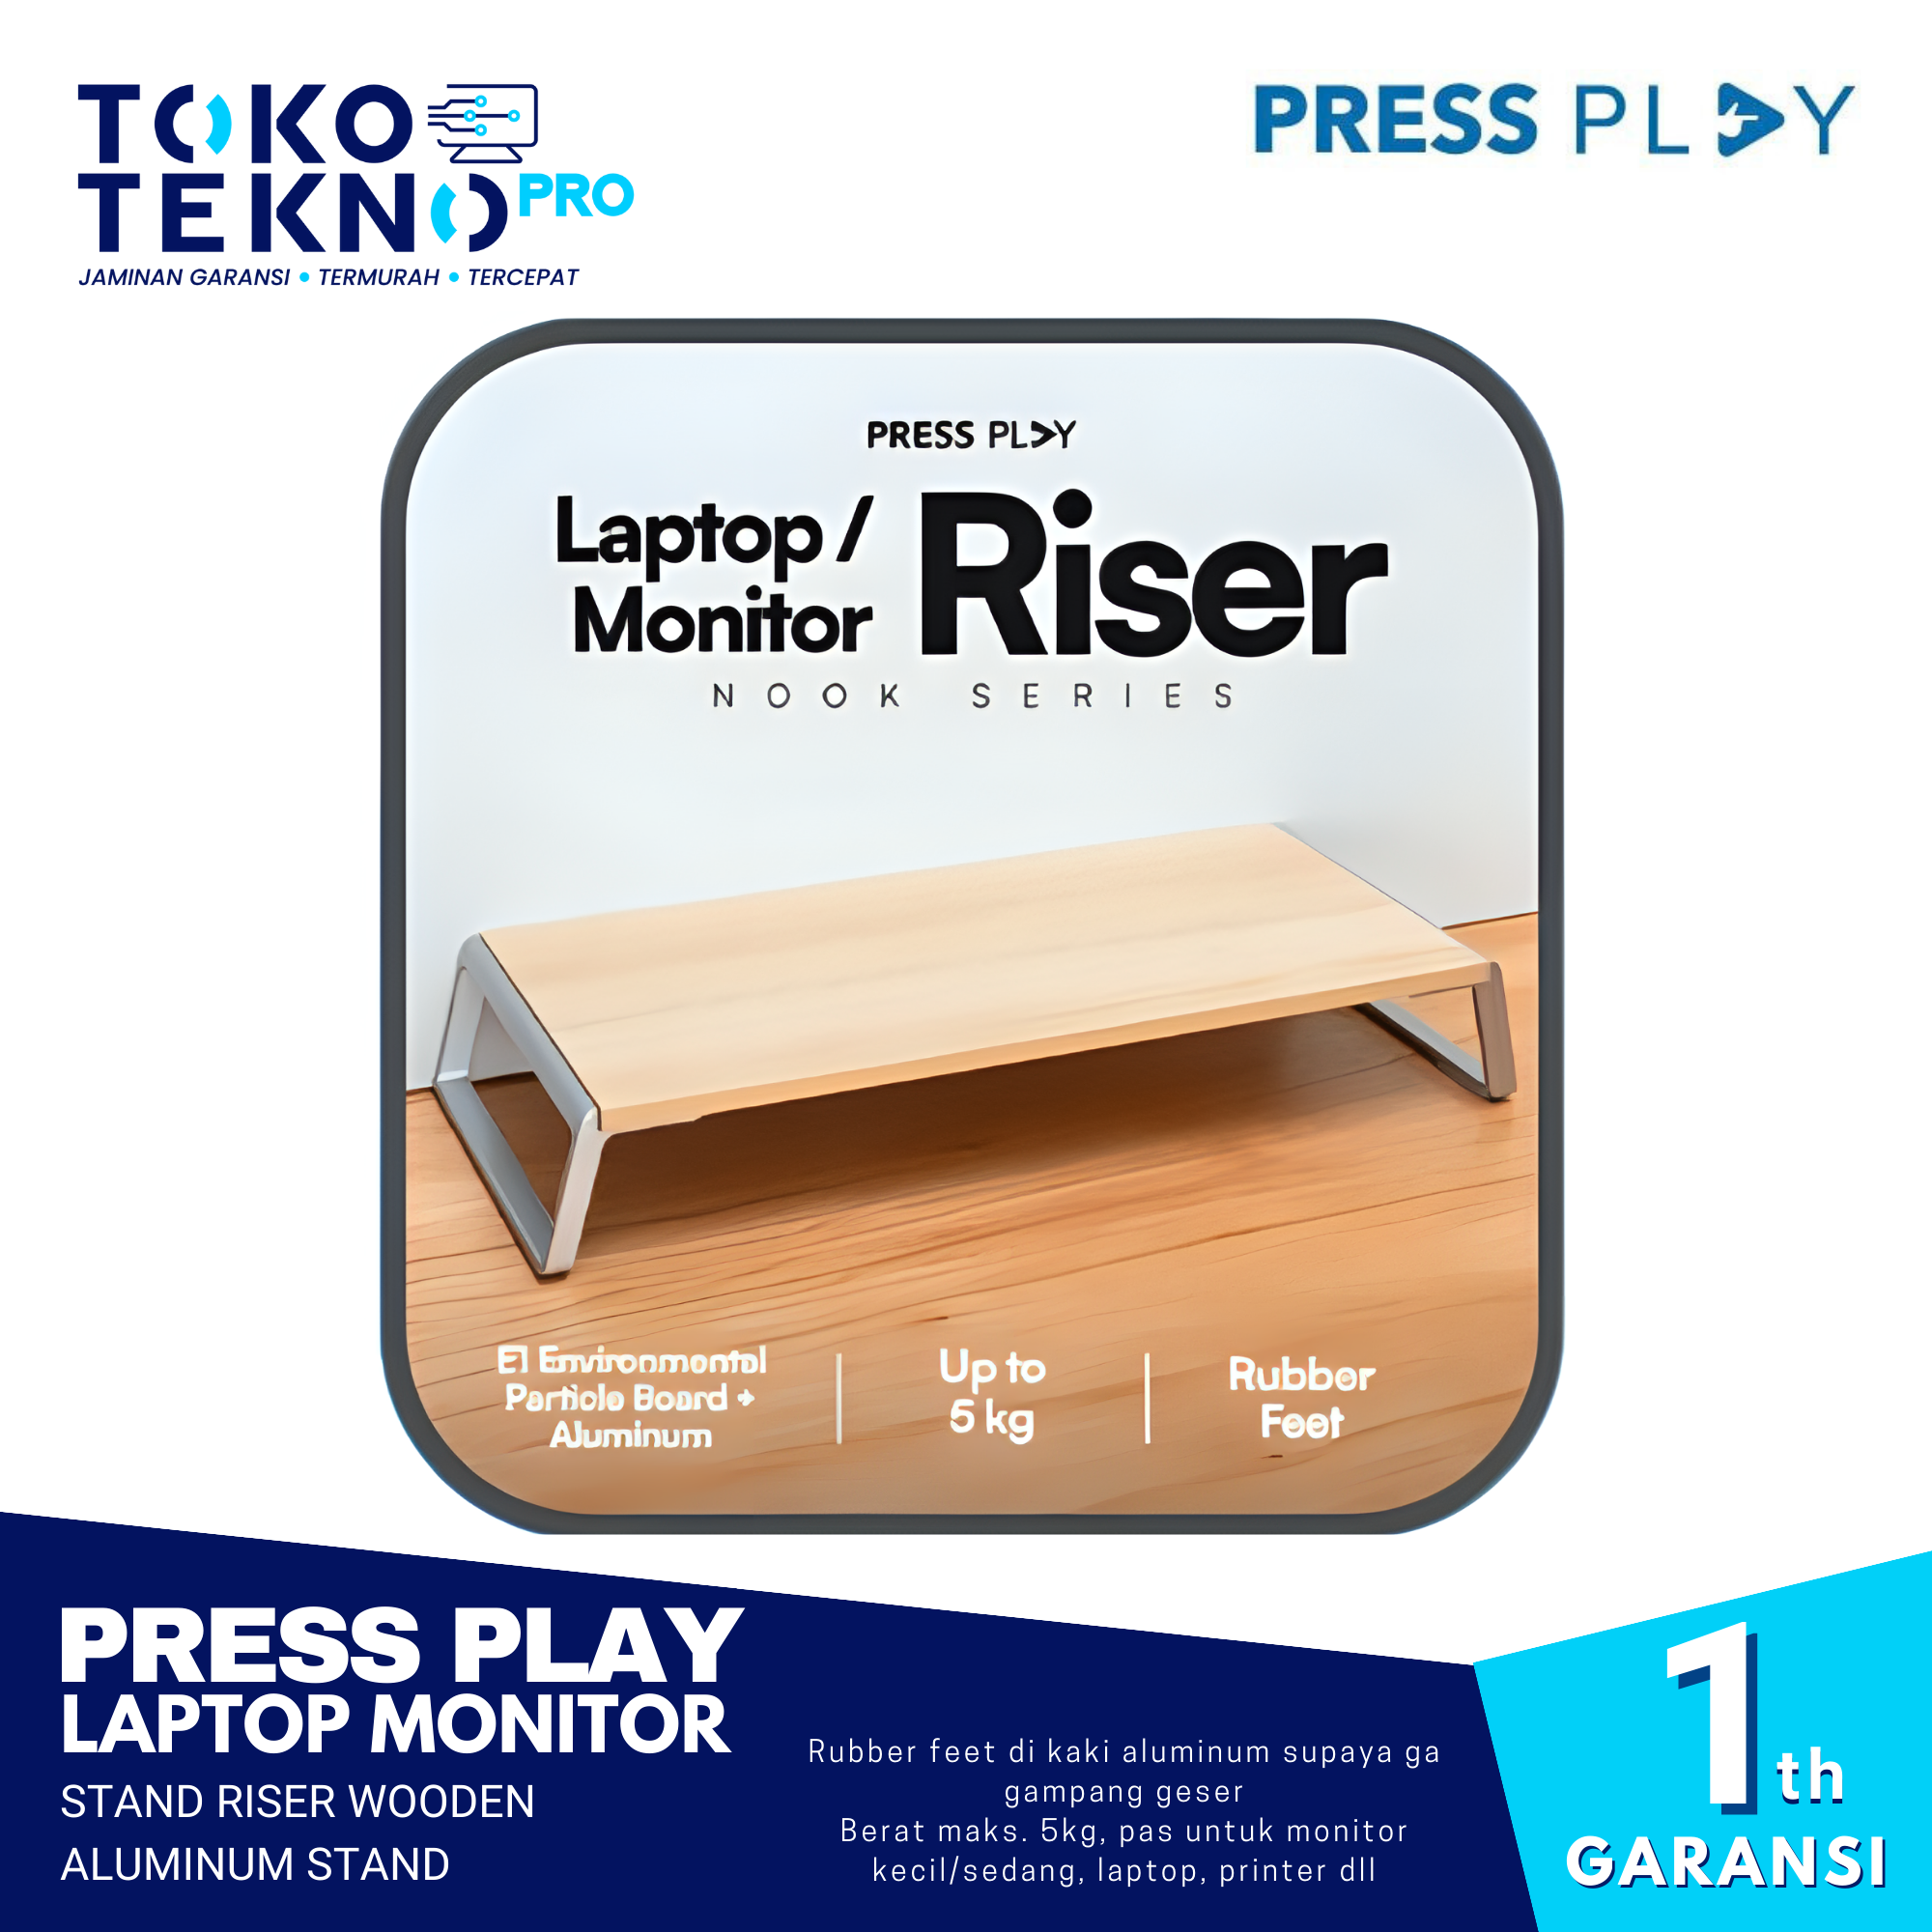 Press Play Laptop Monitor Stand Riser Wooden Aluminum Stand